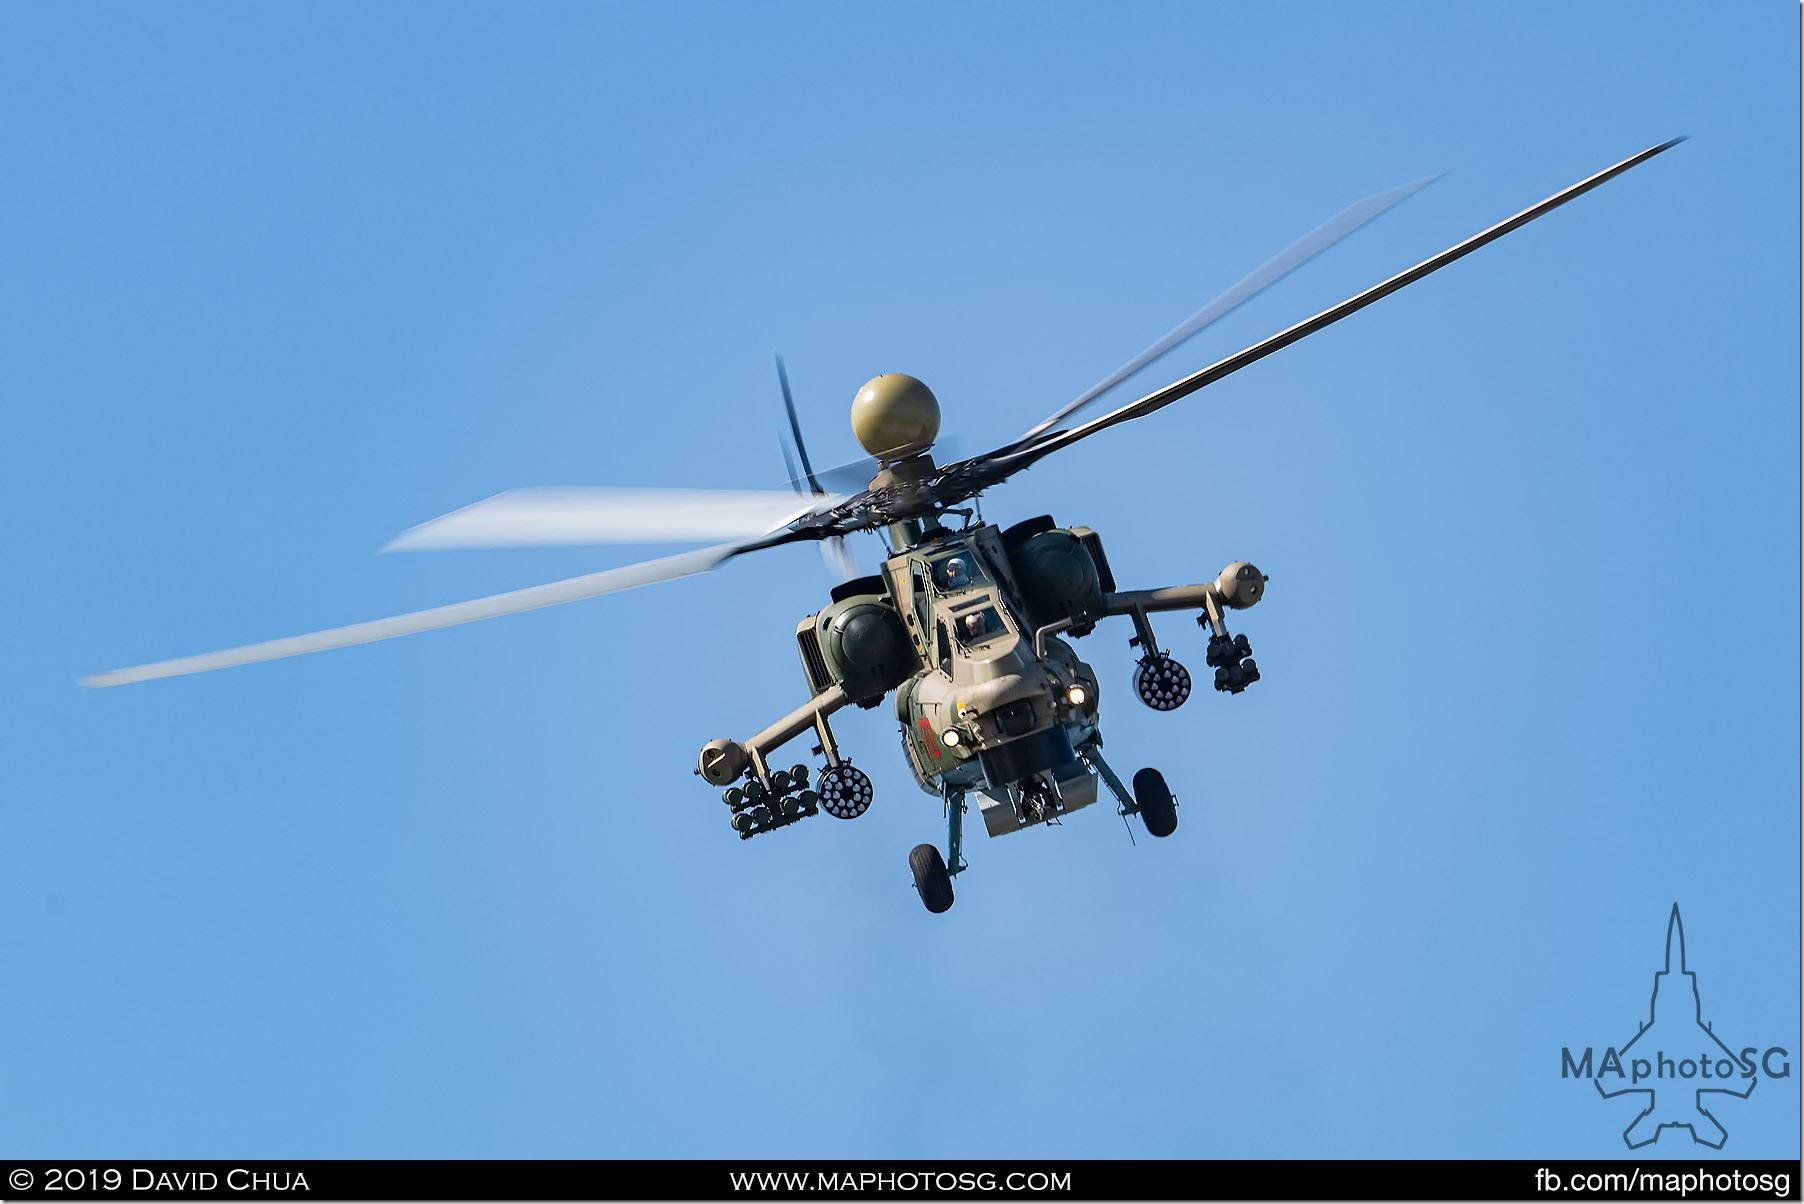 Mil Mi-28 all-weather anti-armor attack helicopter